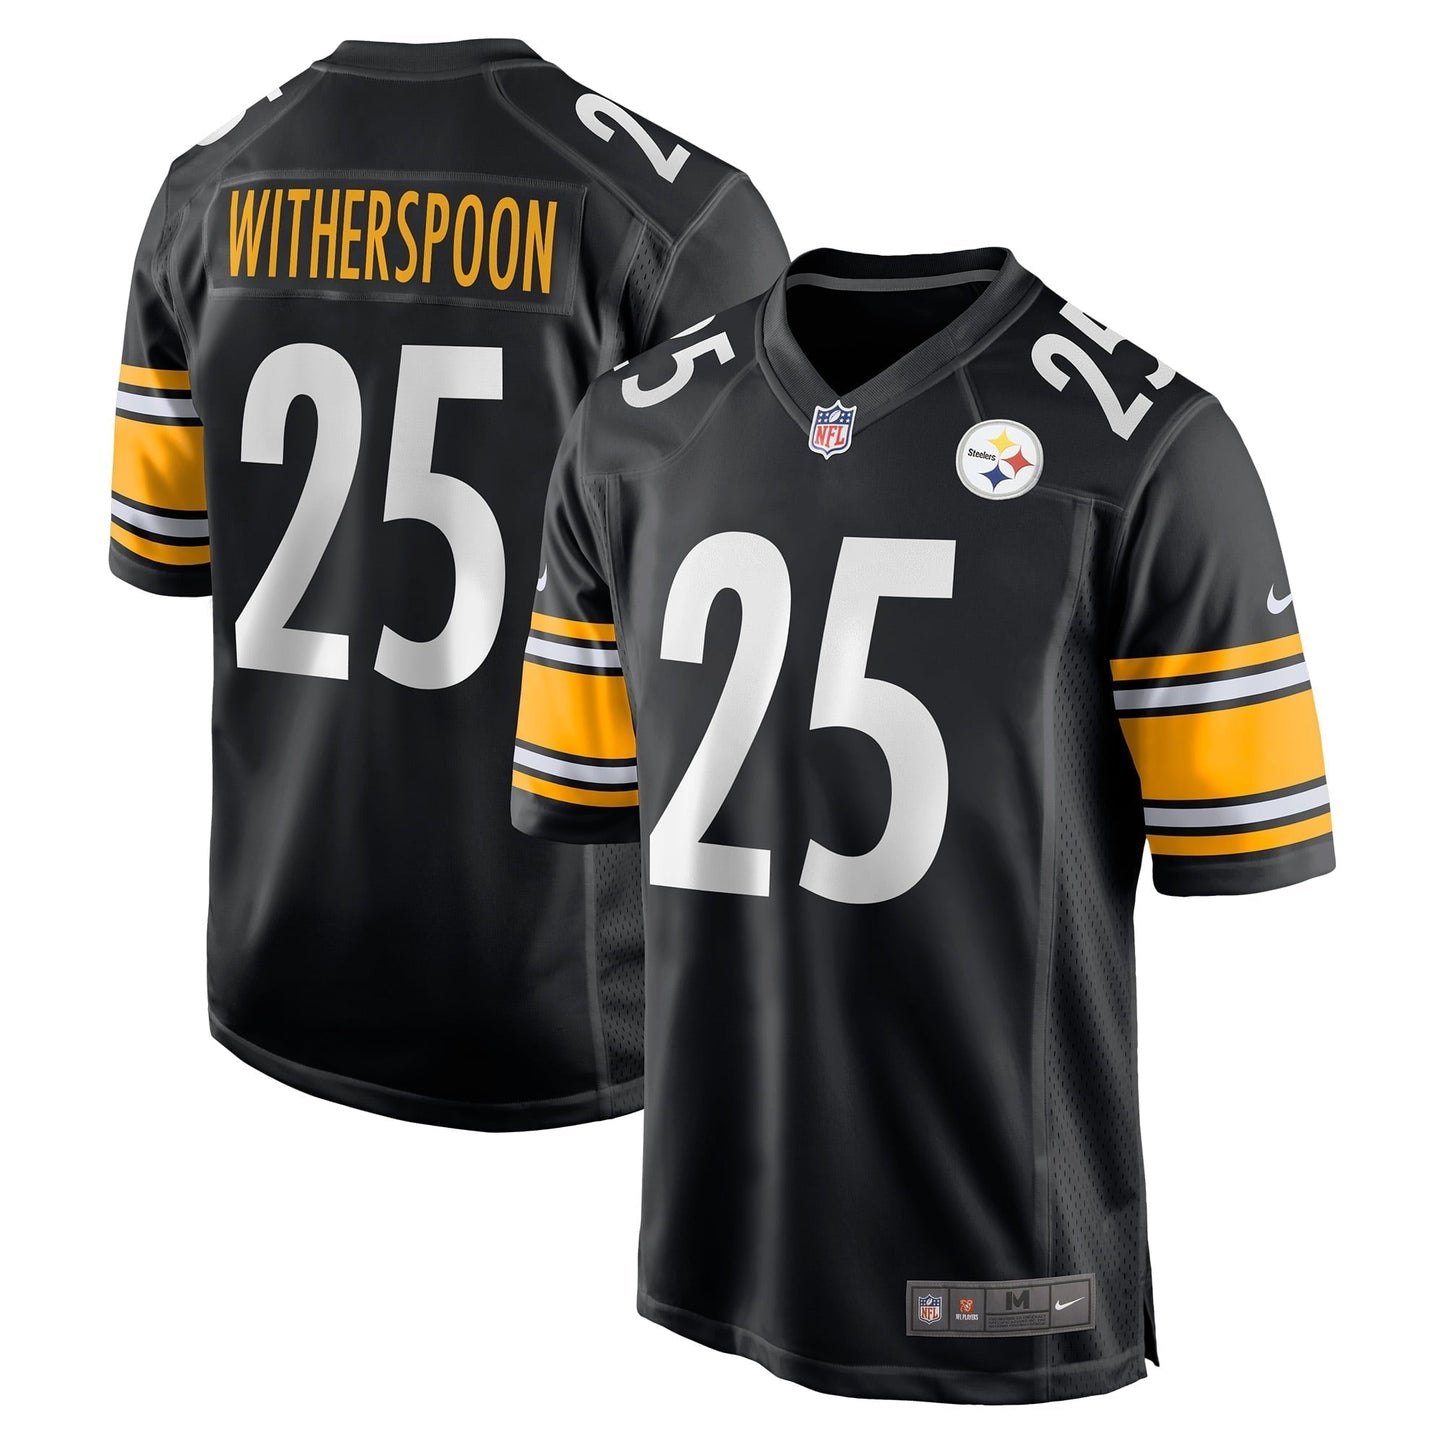 Men's Nike Ahkello Witherspoon Black Pittsburgh Steelers Game Jersey